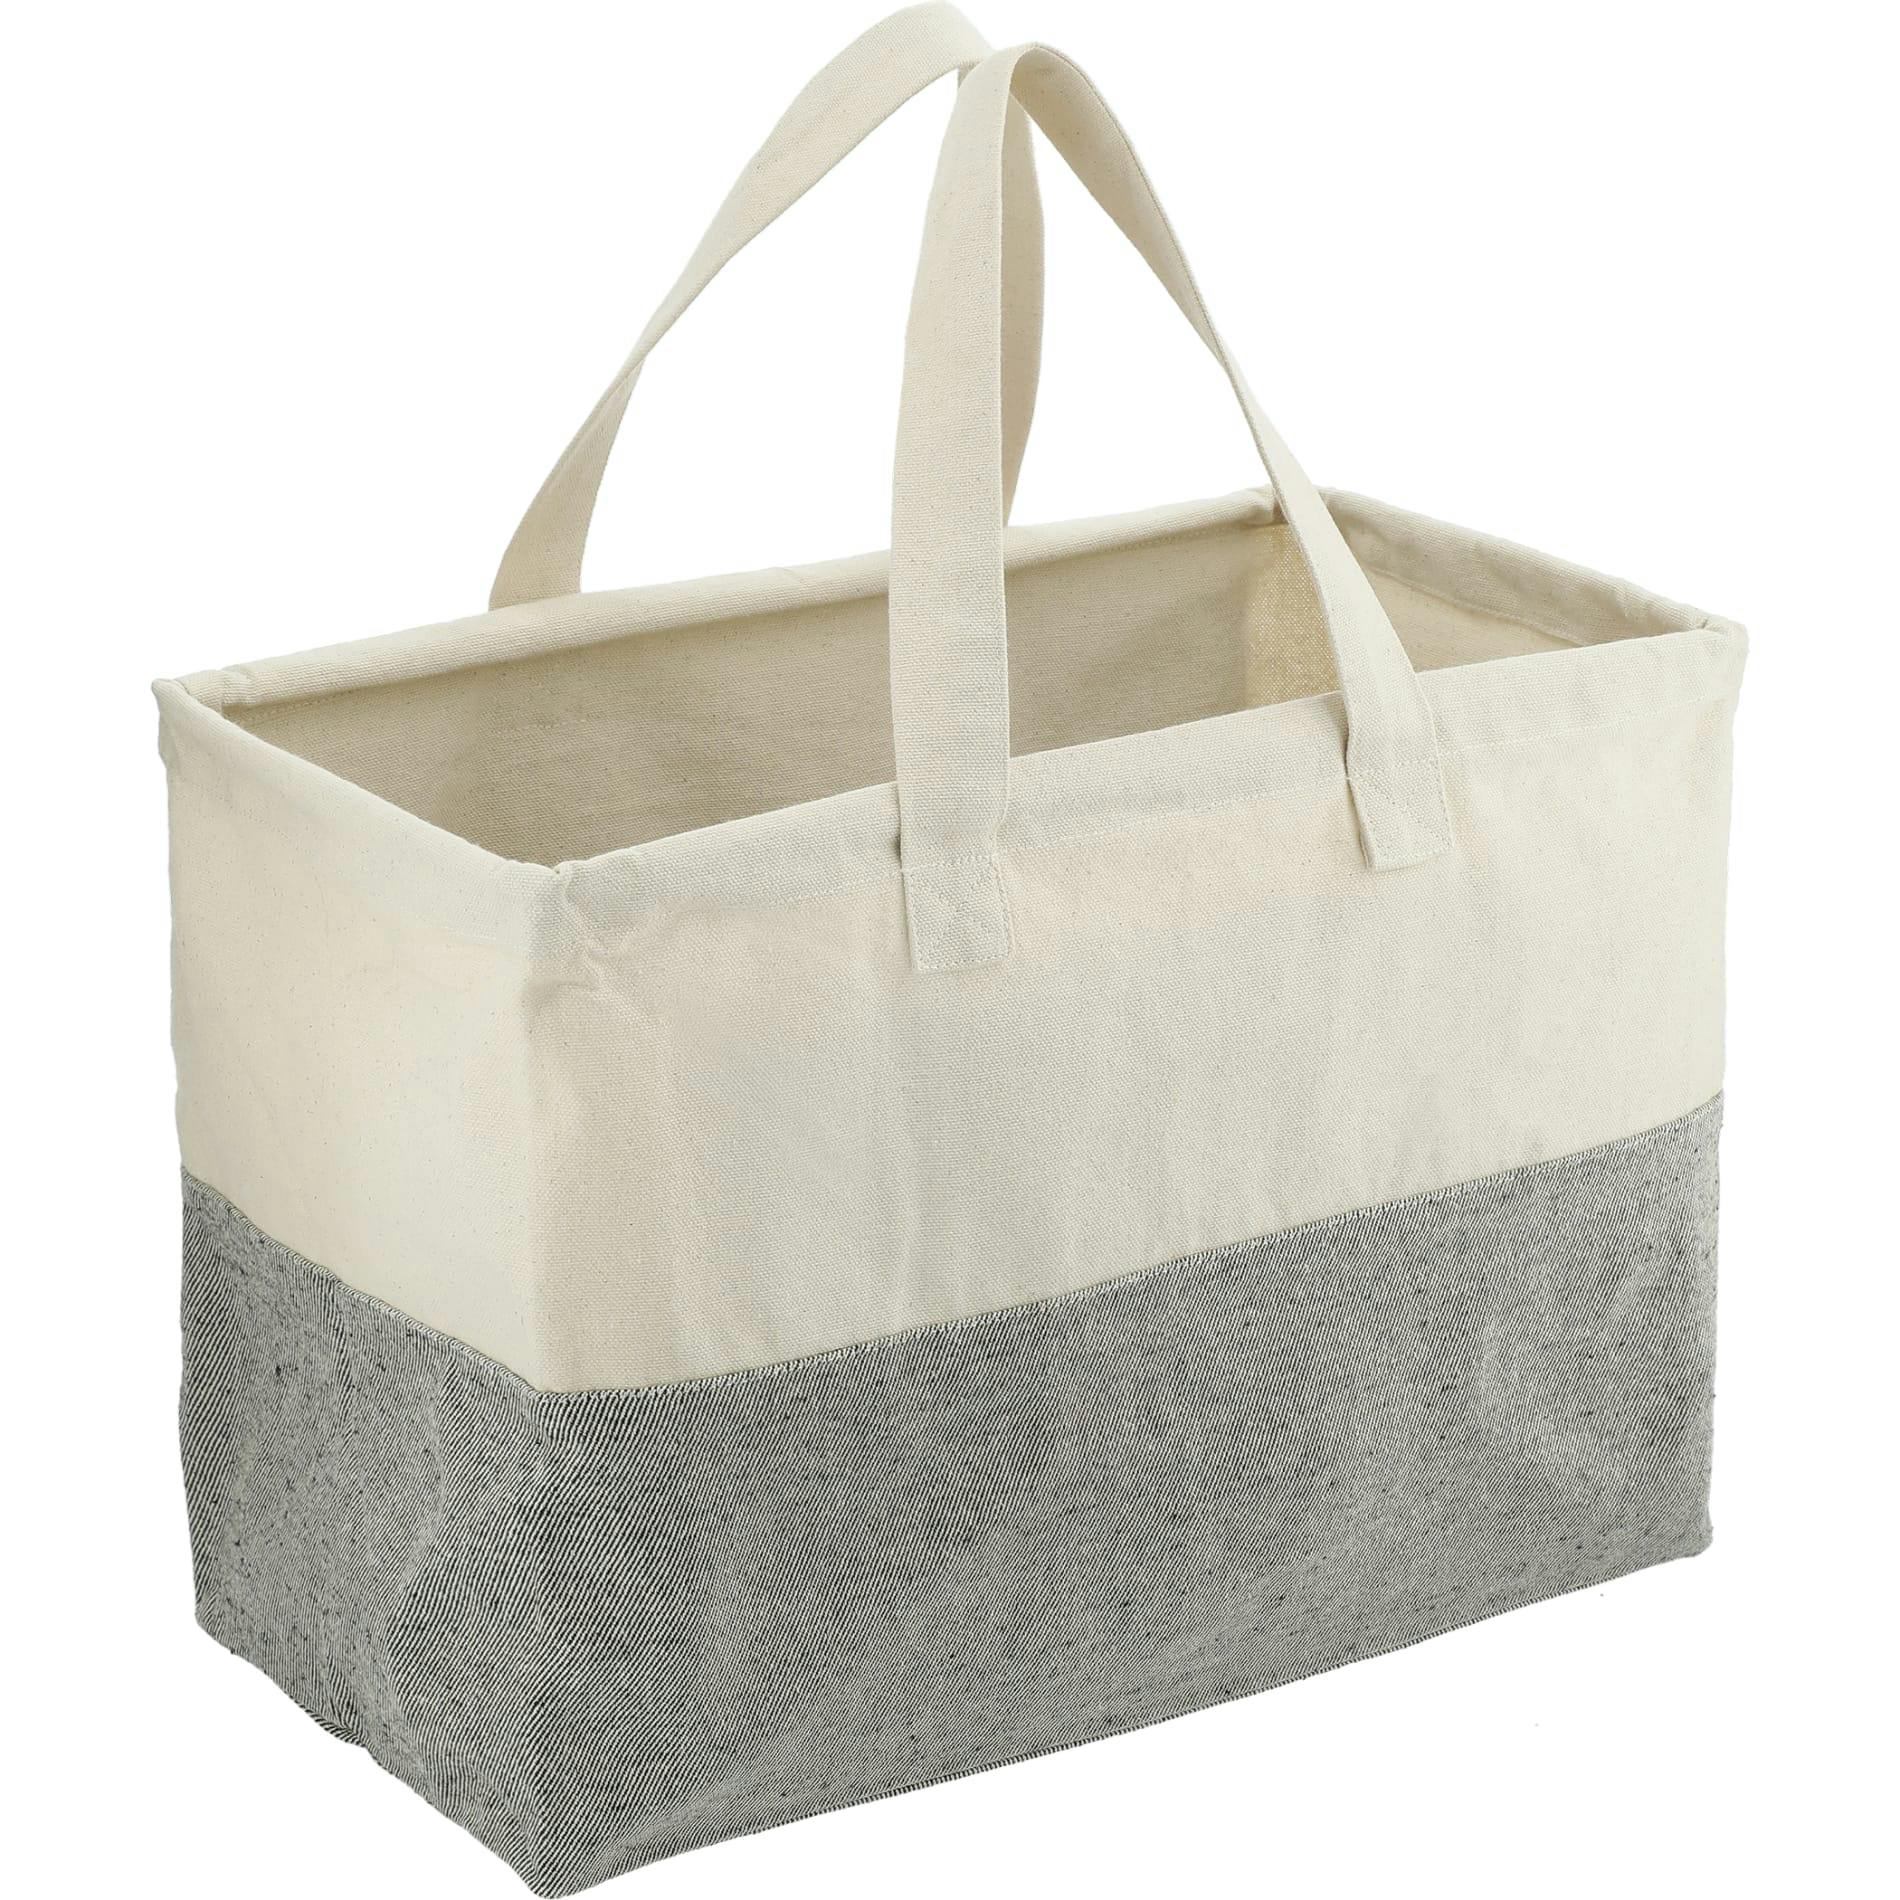 Recycled Cotton Utility Tote - additional Image 5